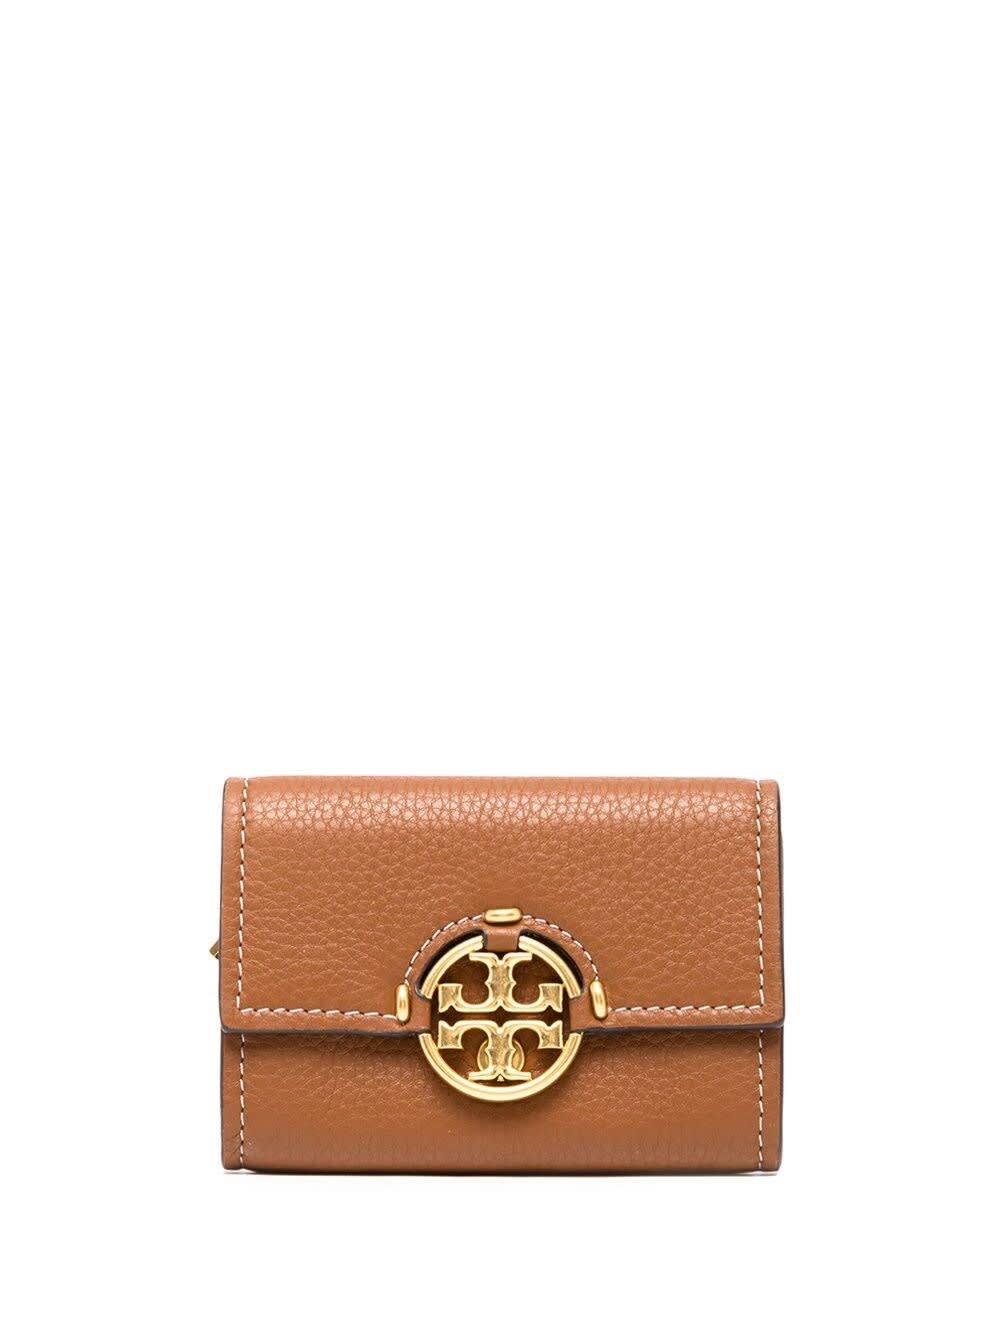 Tory Burch Brown Leather Wallet With Logo Buckle